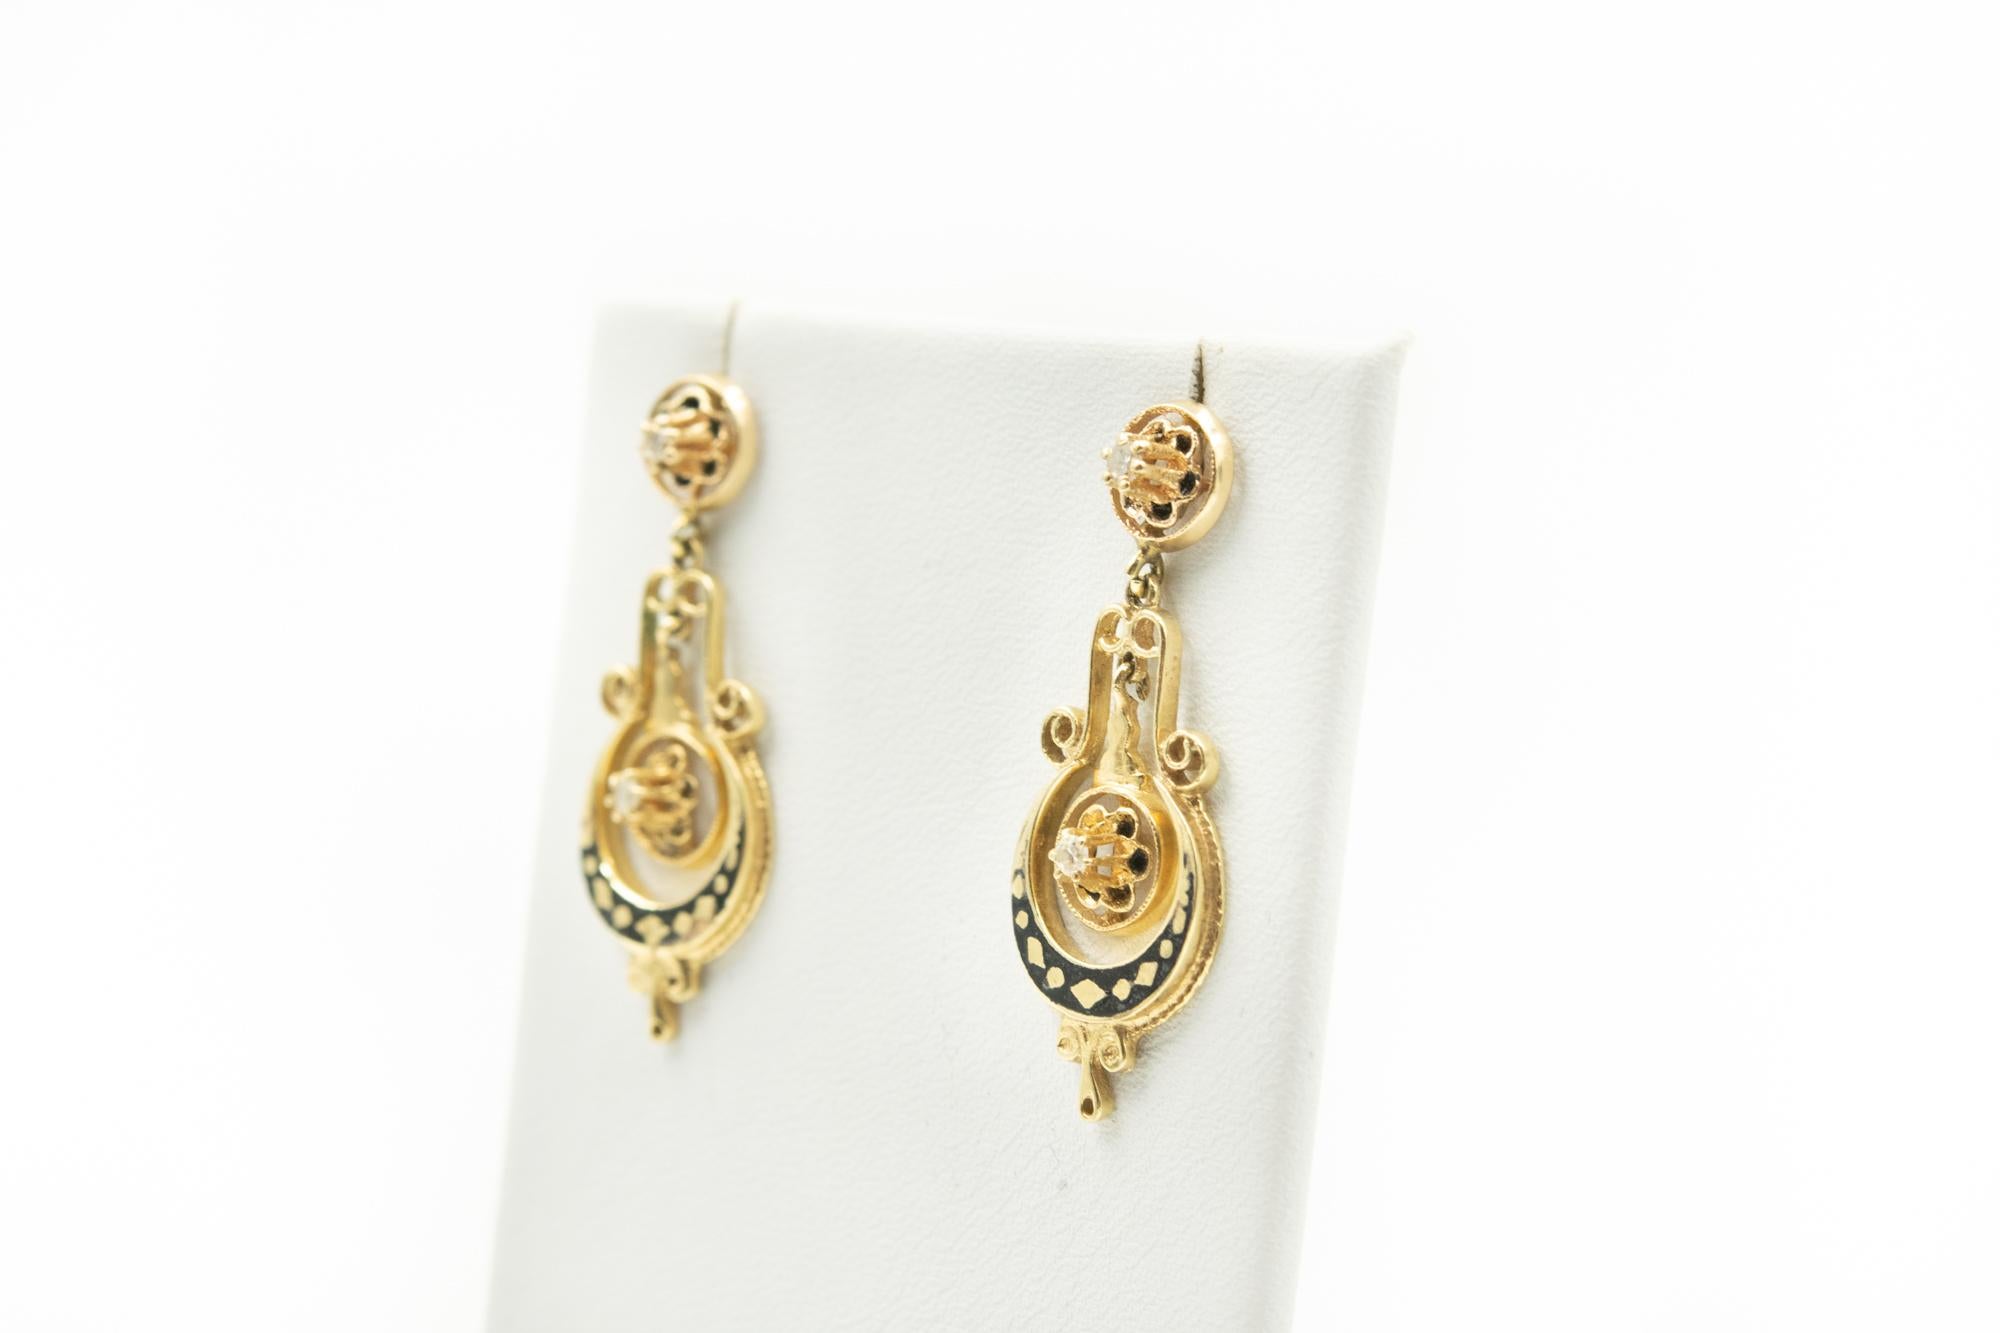 Beautiful pair of Victorian drop earrings made of 10k yellow gold with black enamel accents and single cut diamonds.  The post is attached to a gold flower with black enamel petals and a diamond center.  A similar piece dangles in the center of the